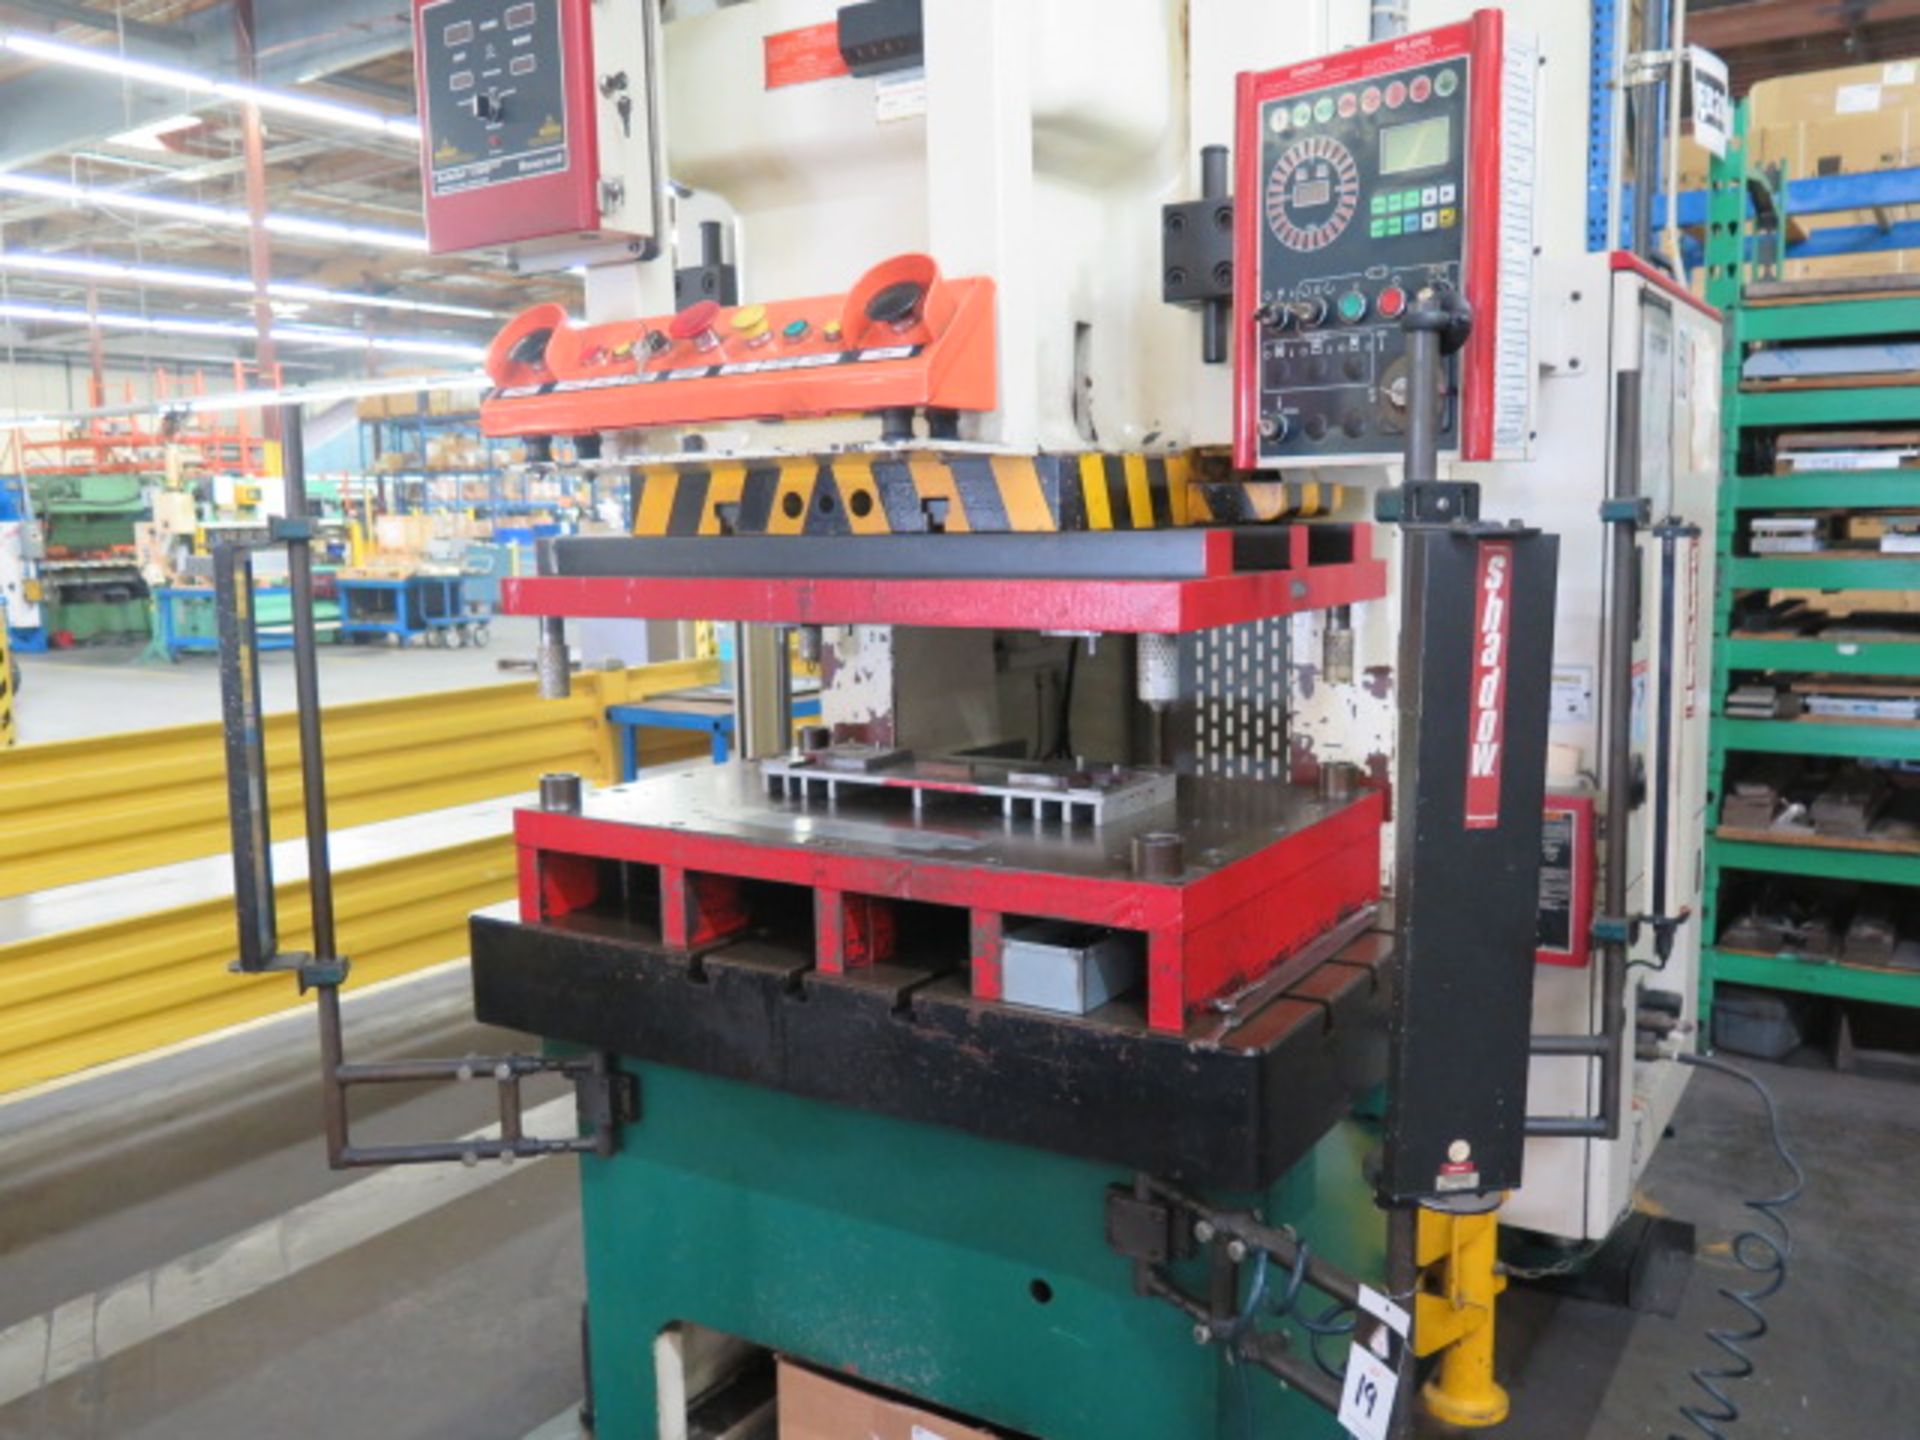 2002 Southerland MARK-121 121 Ton Gap Frame Punch Press s/n 10201101009 Wintress Control, SOLD AS IS - Image 5 of 18